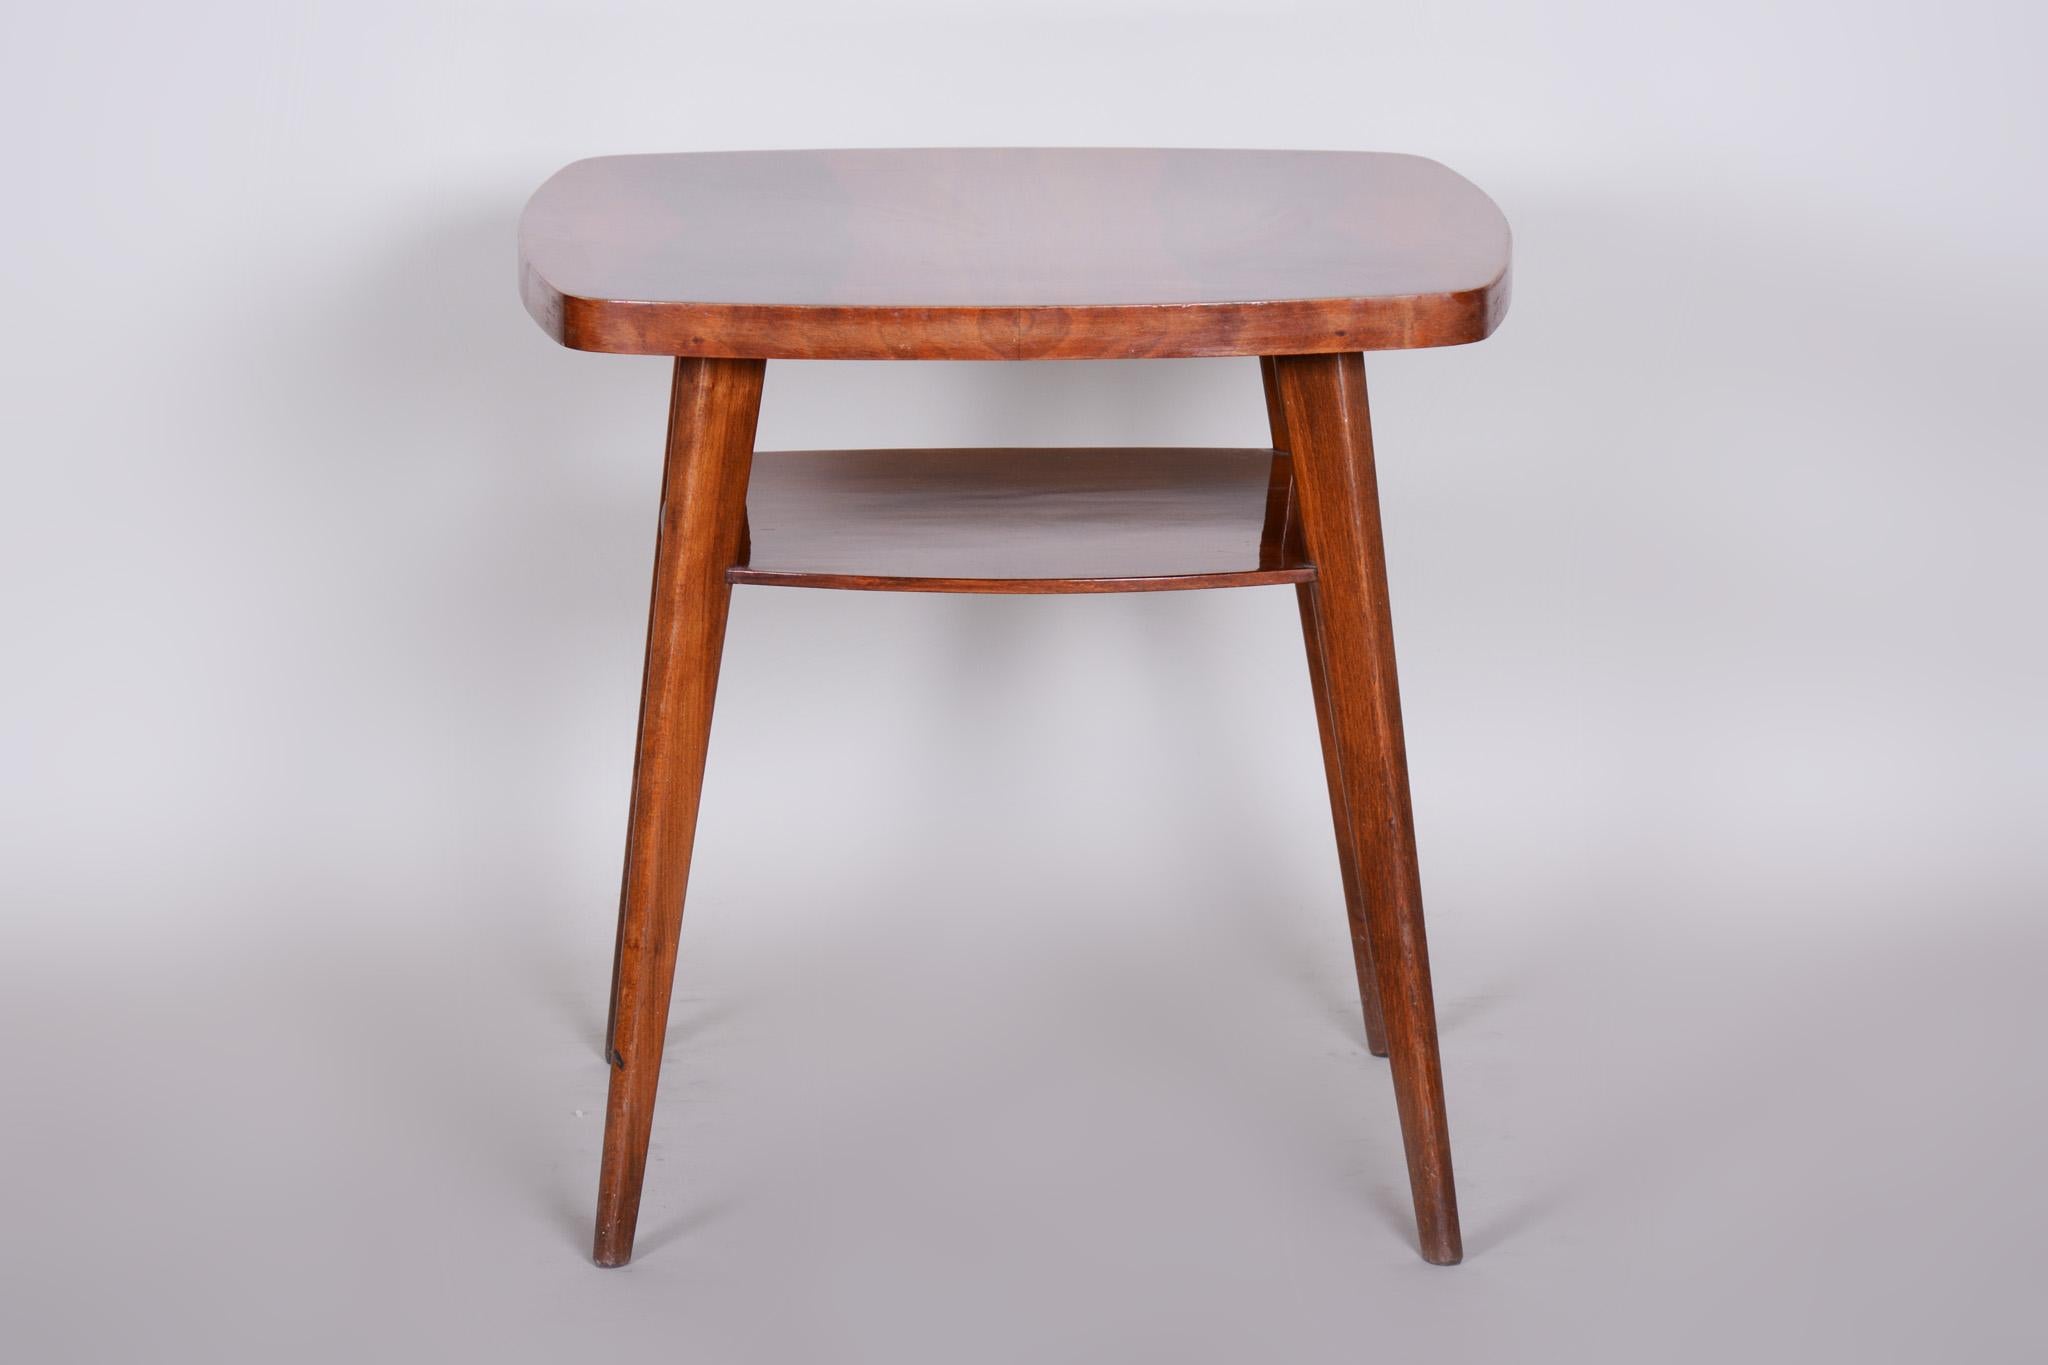 Small coffee table.
Czech midcentury
Material: Walnut
Period: 1950-1959.